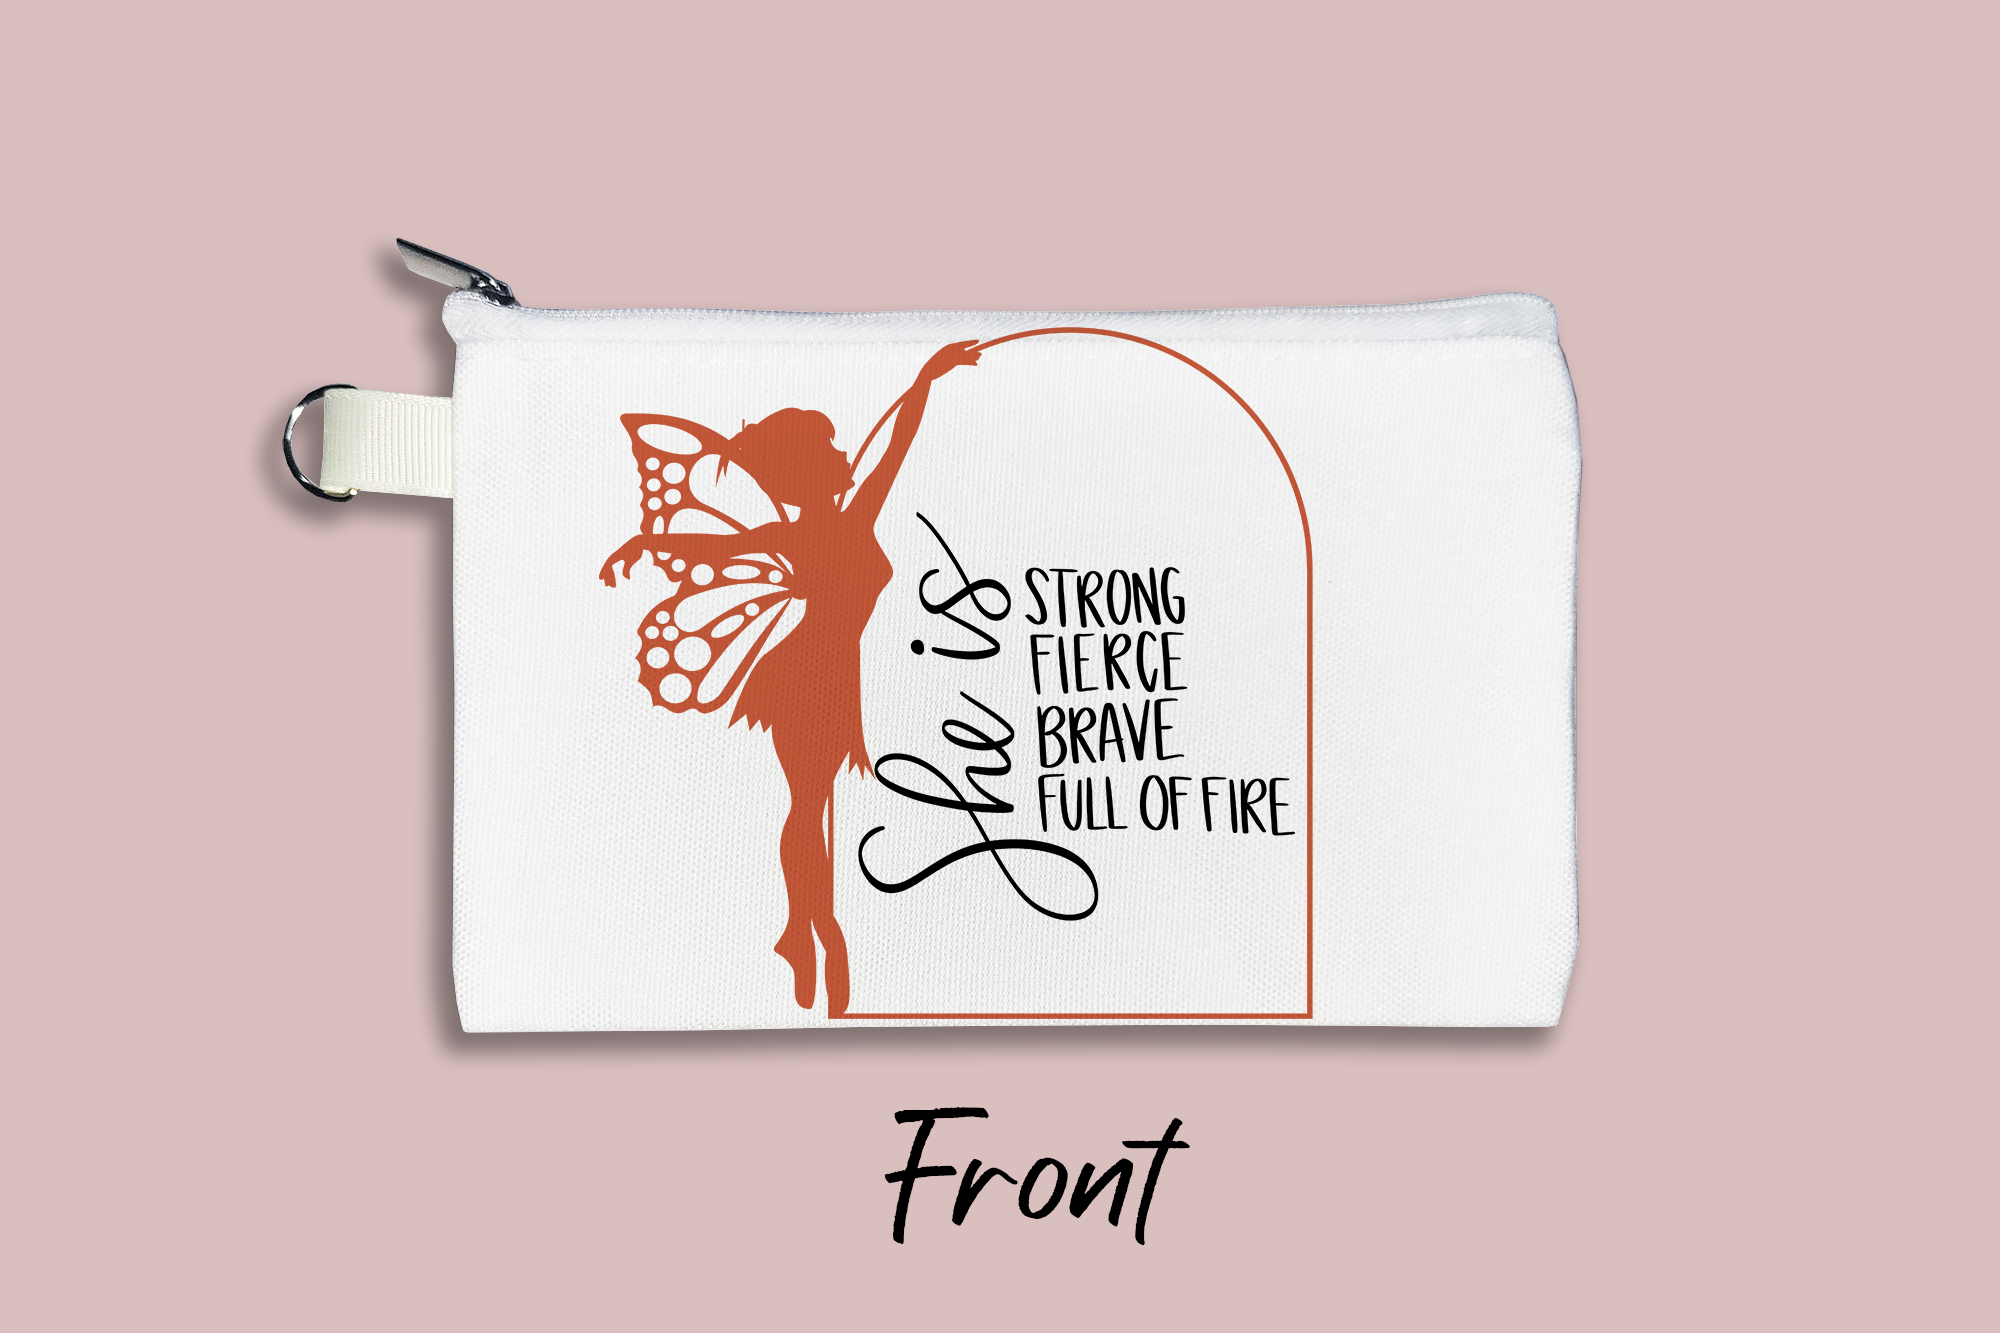 She is Strong Fierce Brave Full of Fire Fairy Personalized Cosmetic Bag